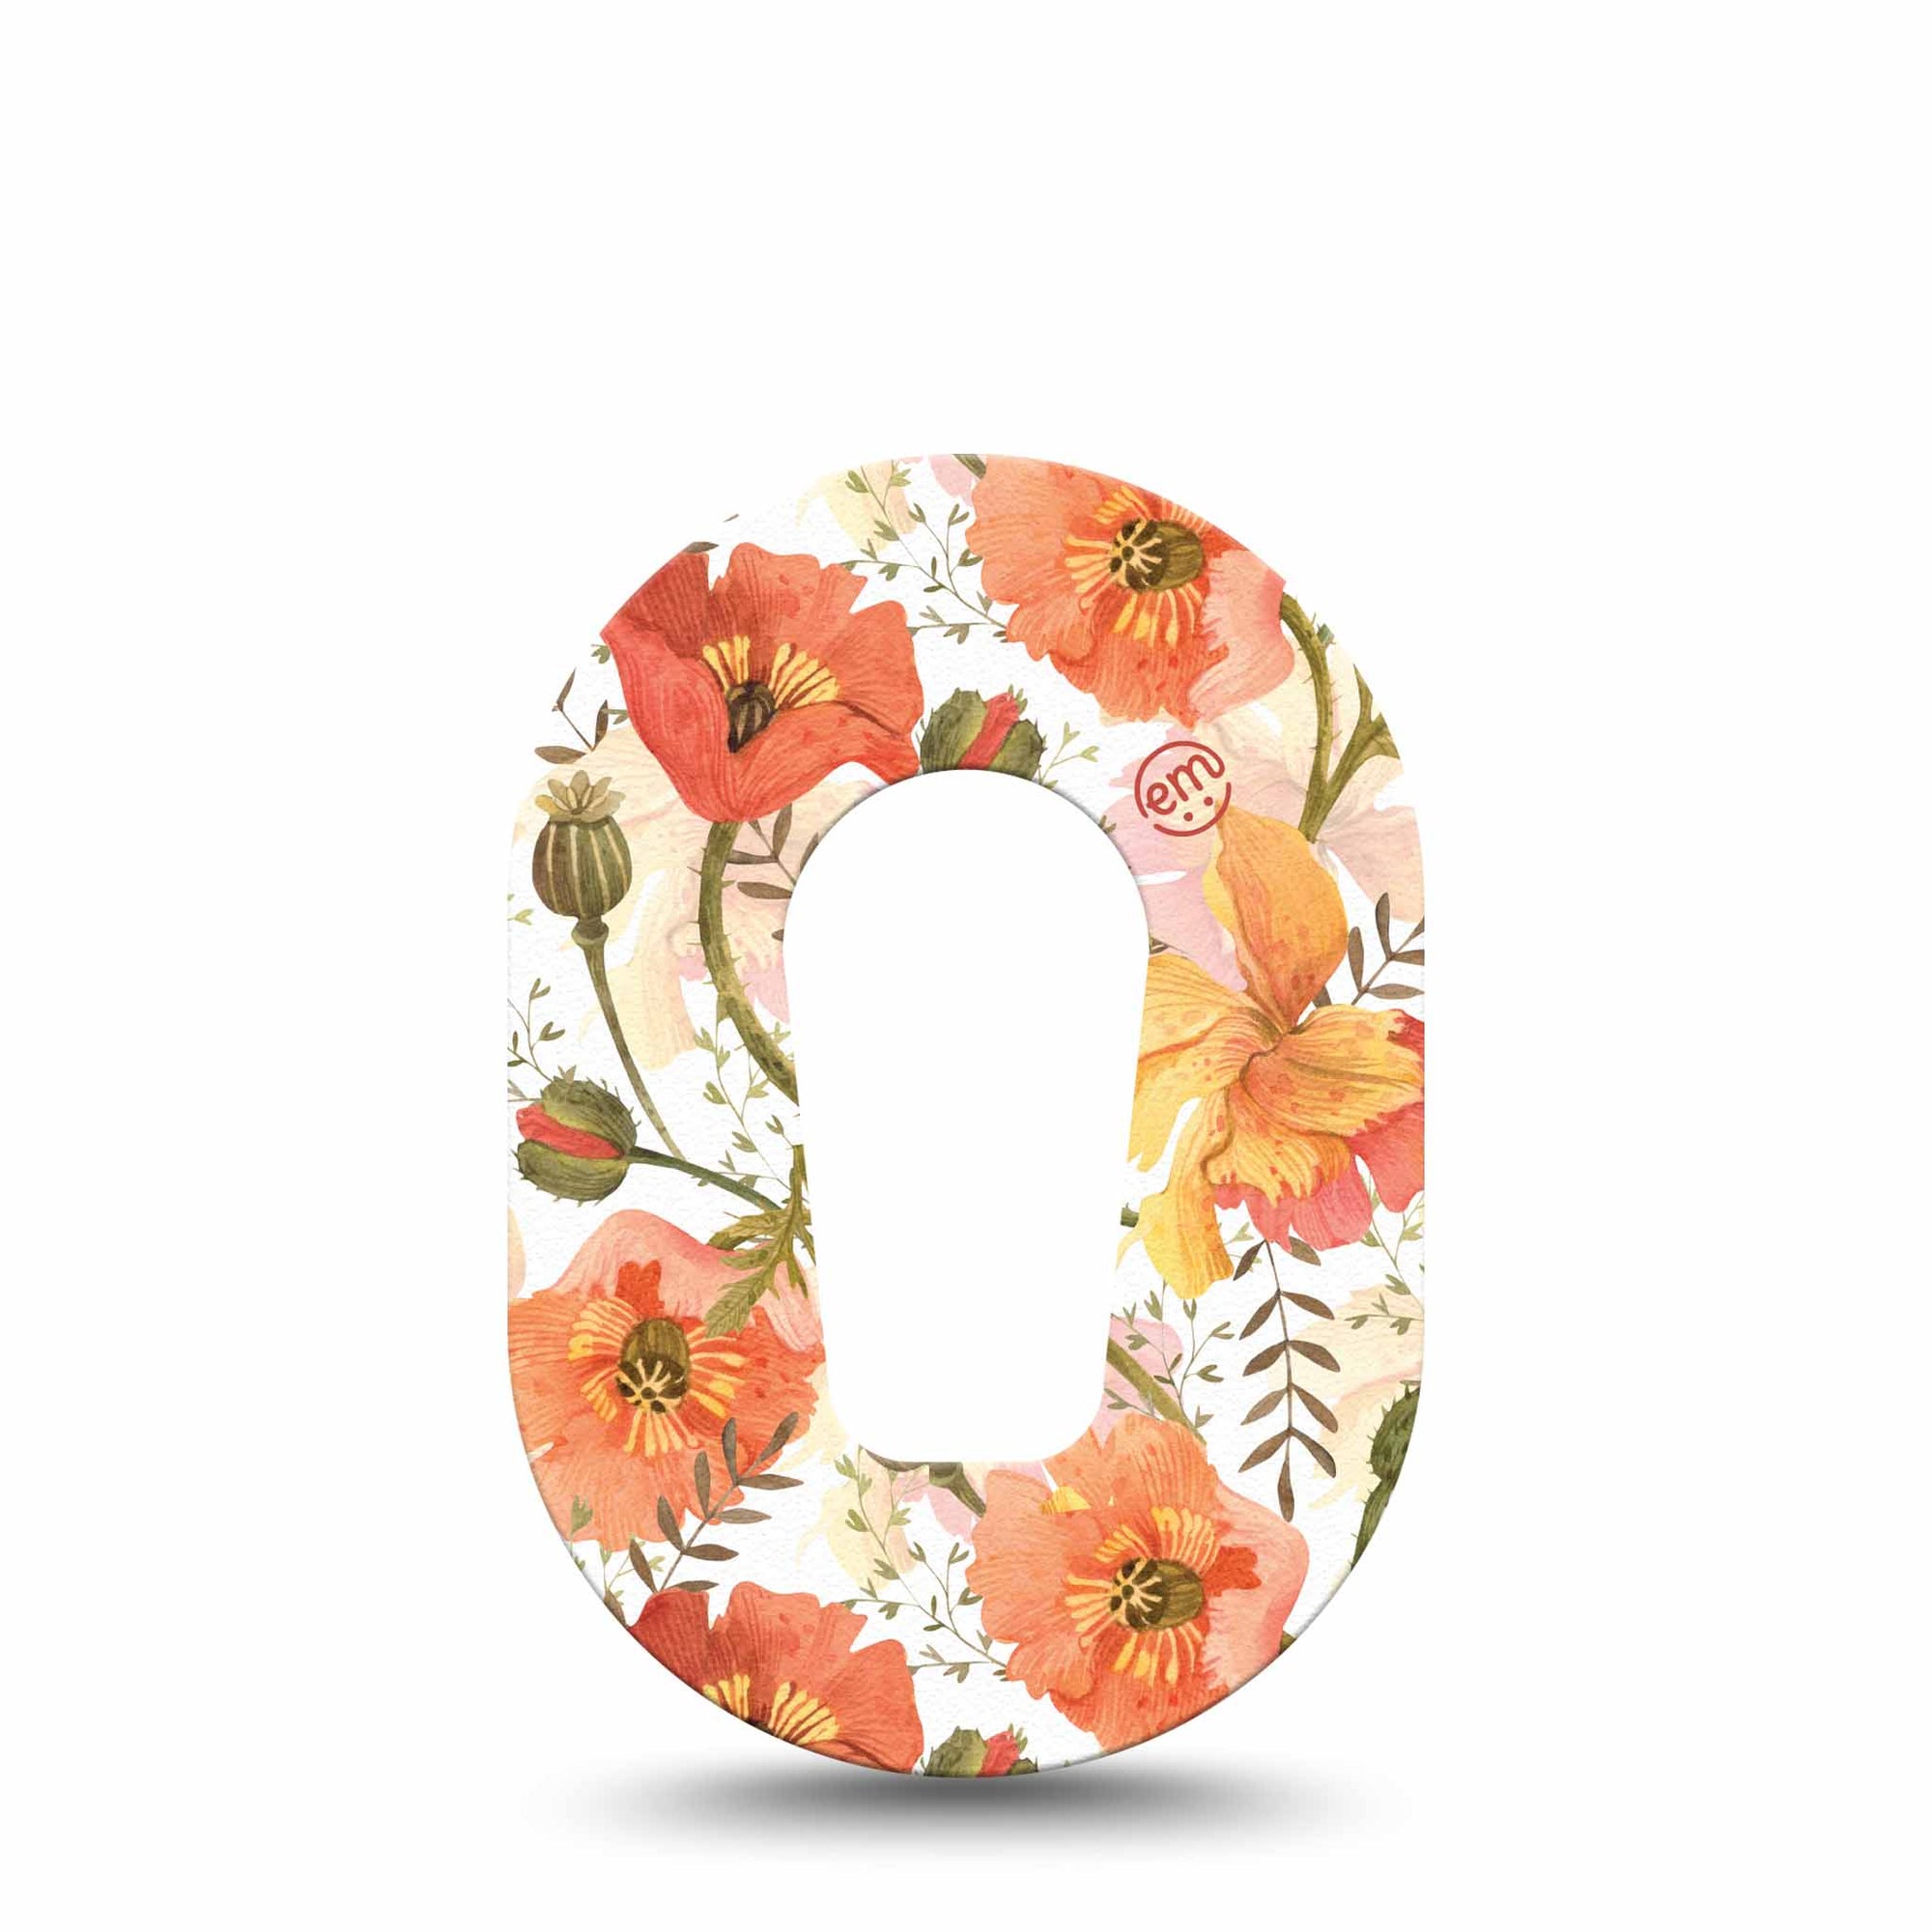 ExpressionMed Peachy Blooms G6 Mini Tape